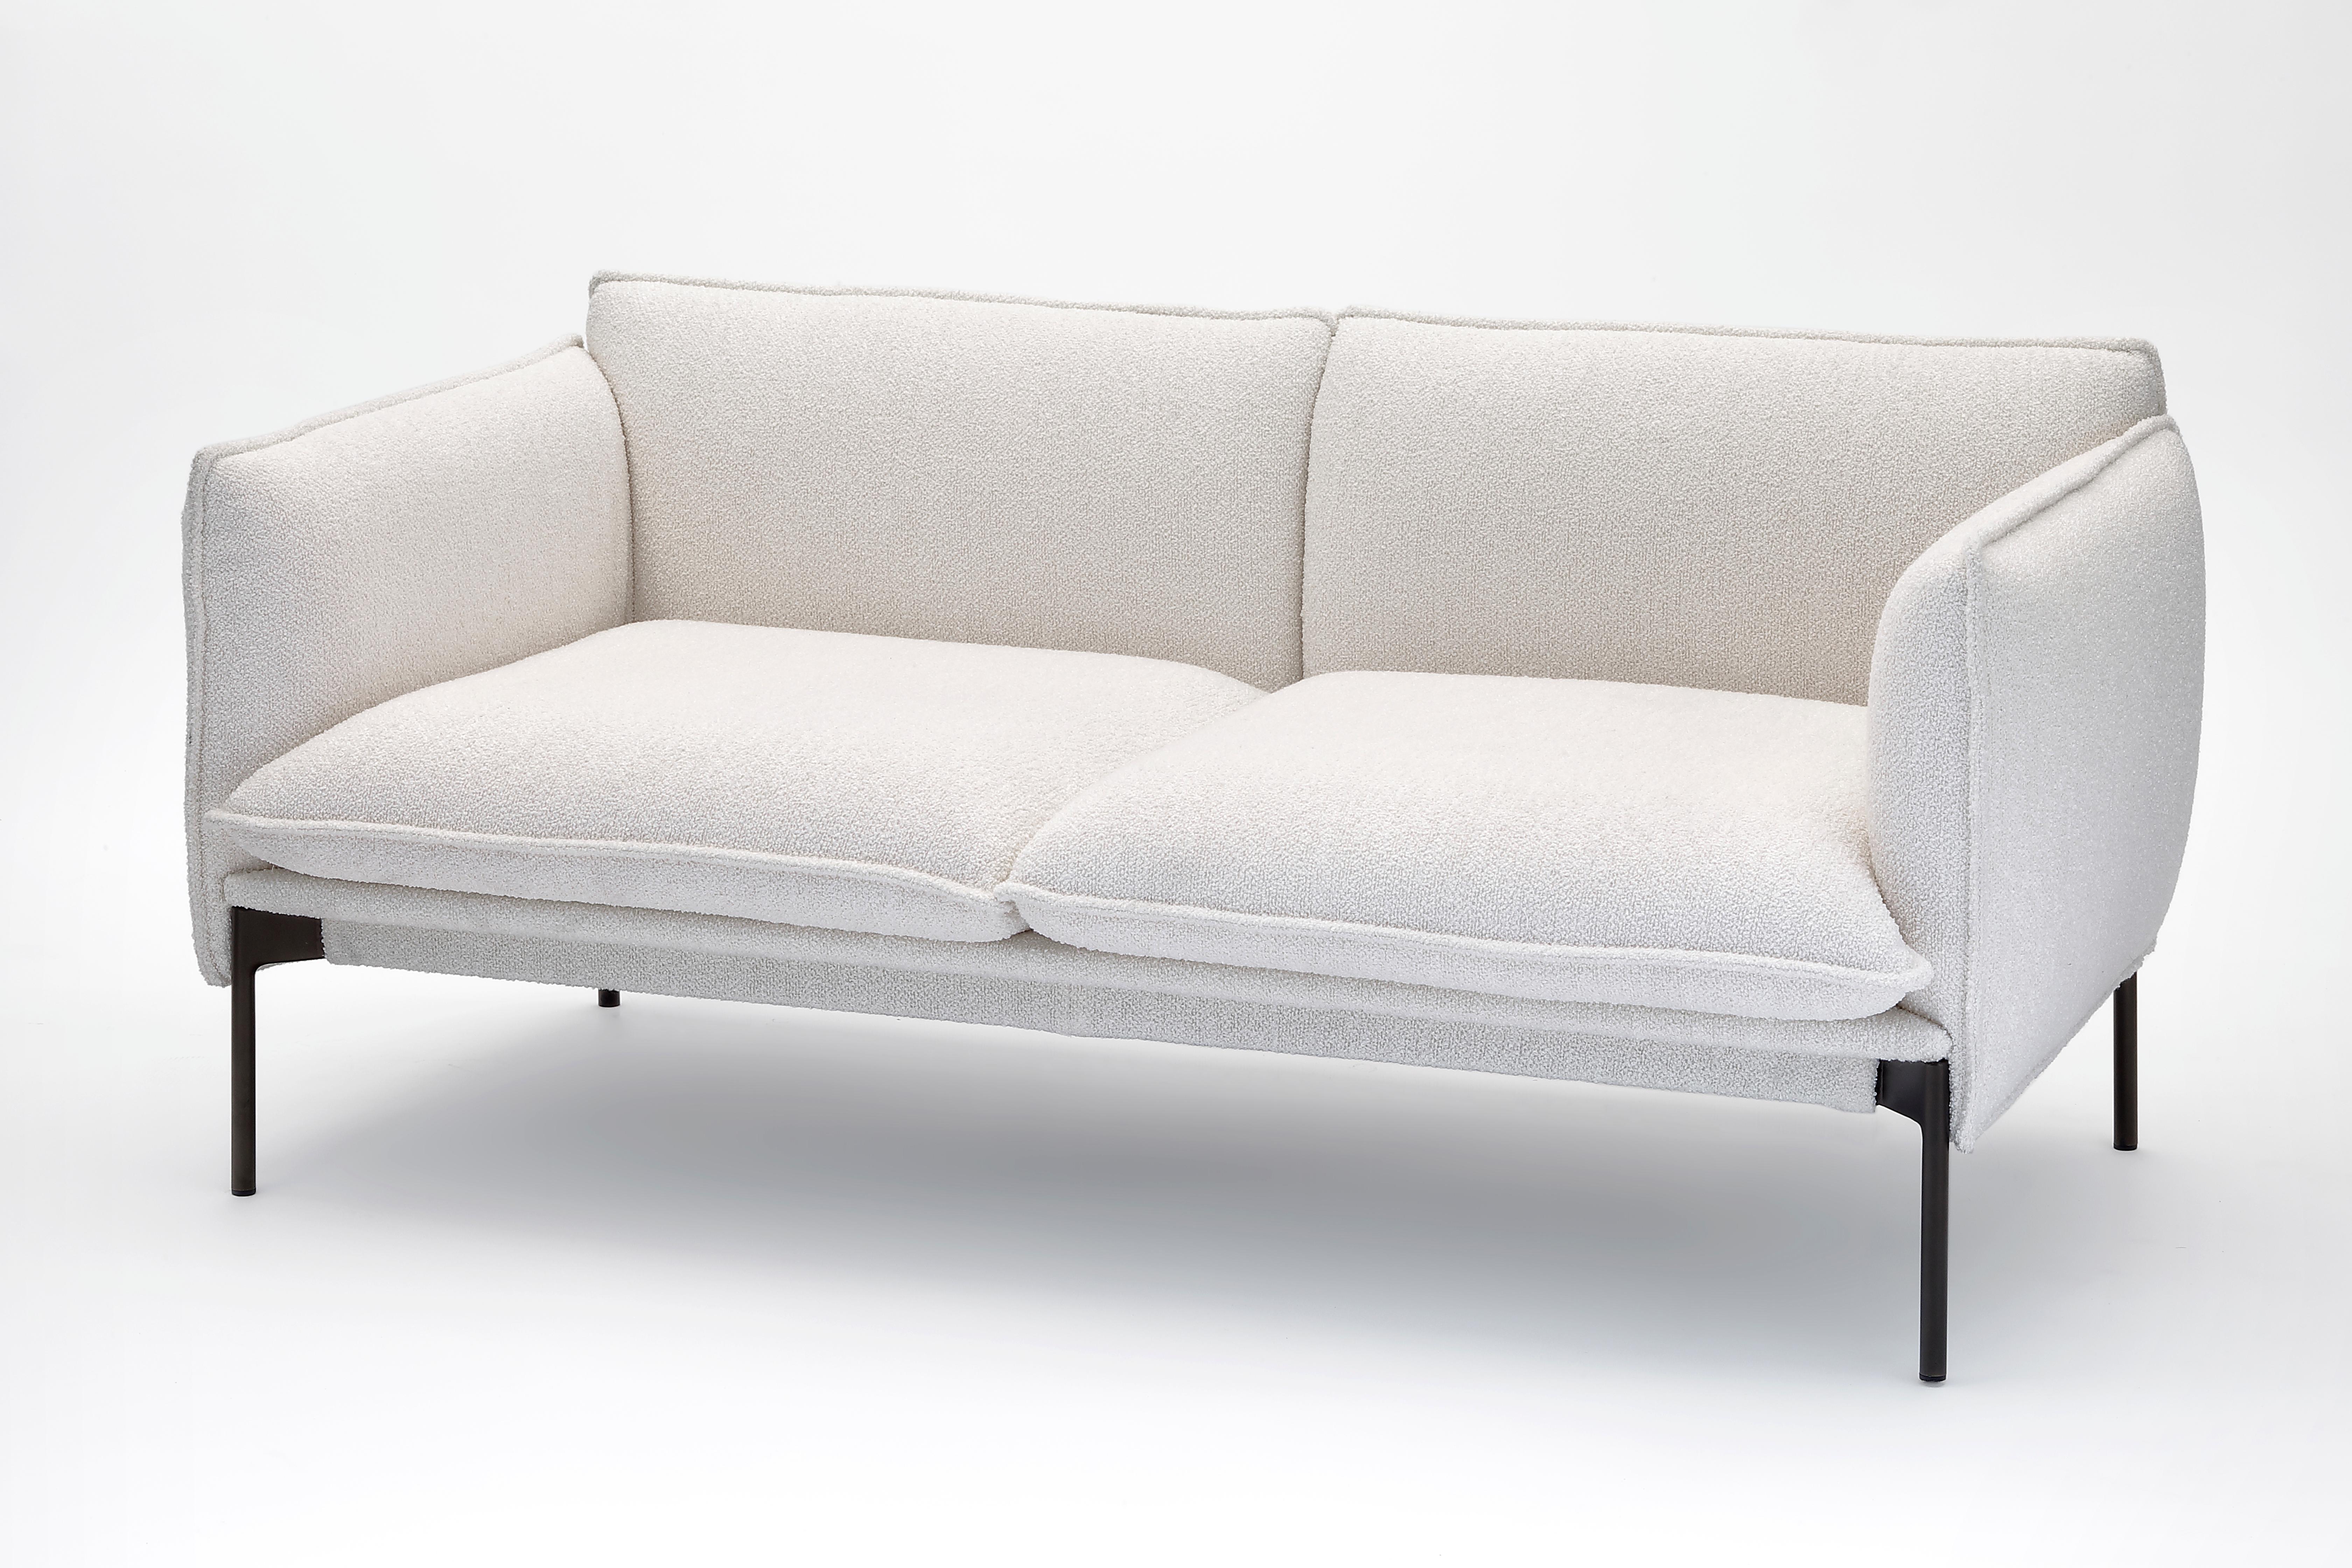 2 seat palm springs sofa by Anderssen & Voll
Materials: Polyurethane foam of different densities, covered with fabric or leather. Base in bronze lacquered metal.
Technique: Lacquered metal, upholstered in fabric. 
Dimensions: D 83 x W 160 x H 69